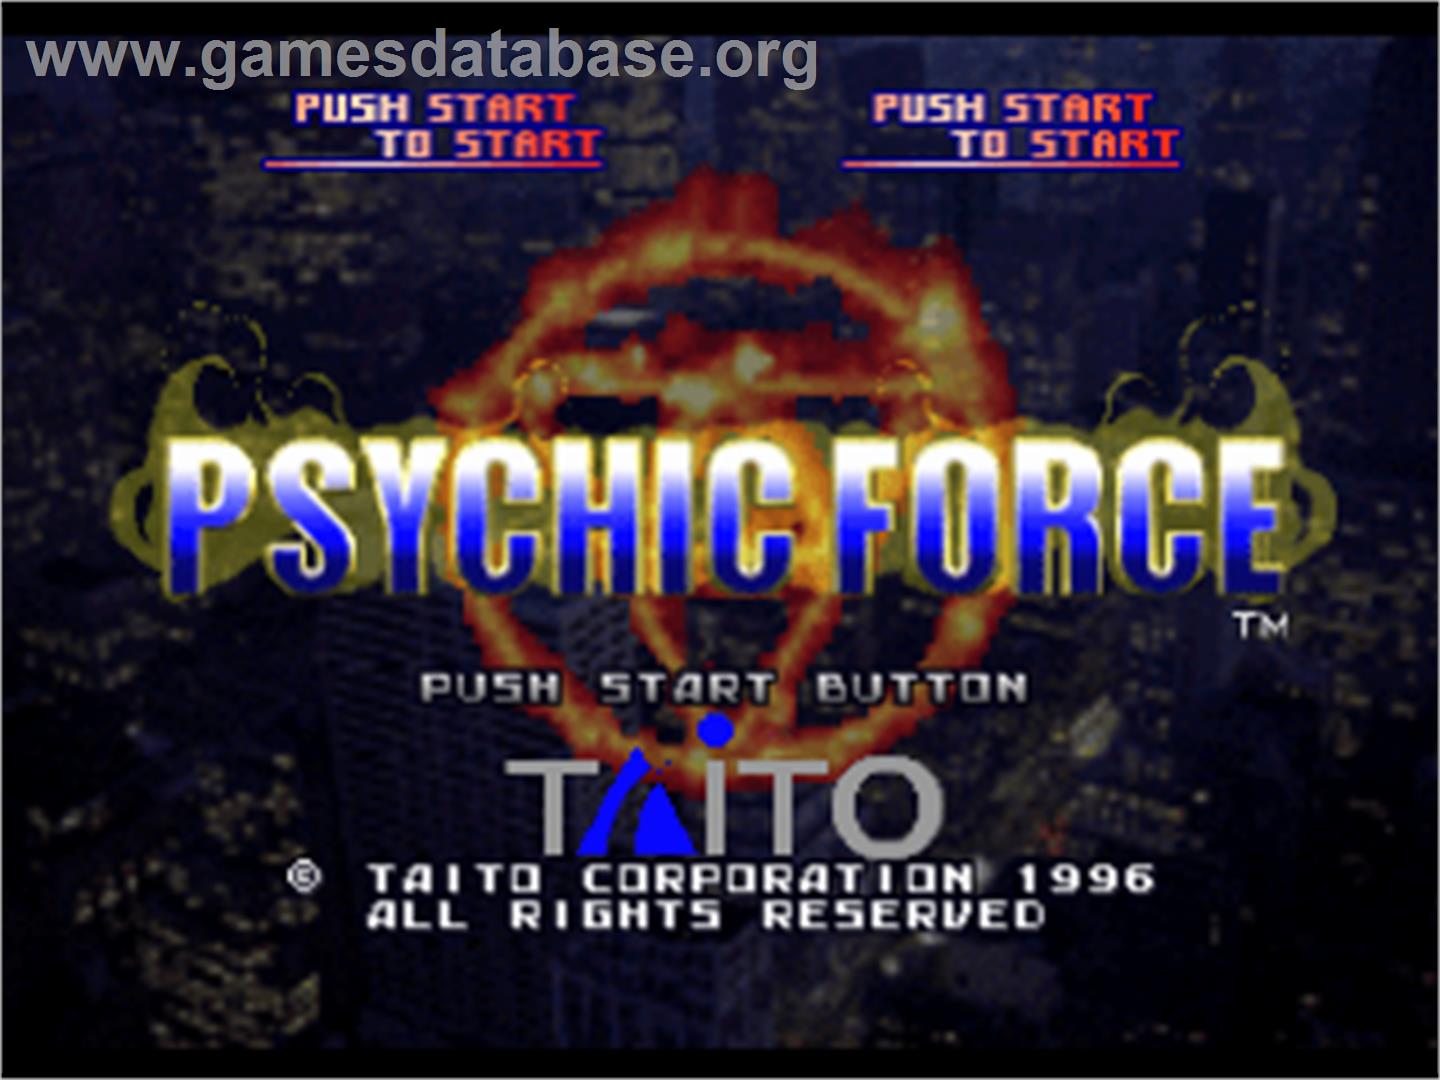 Psychic Force - Sony Playstation - Artwork - Title Screen